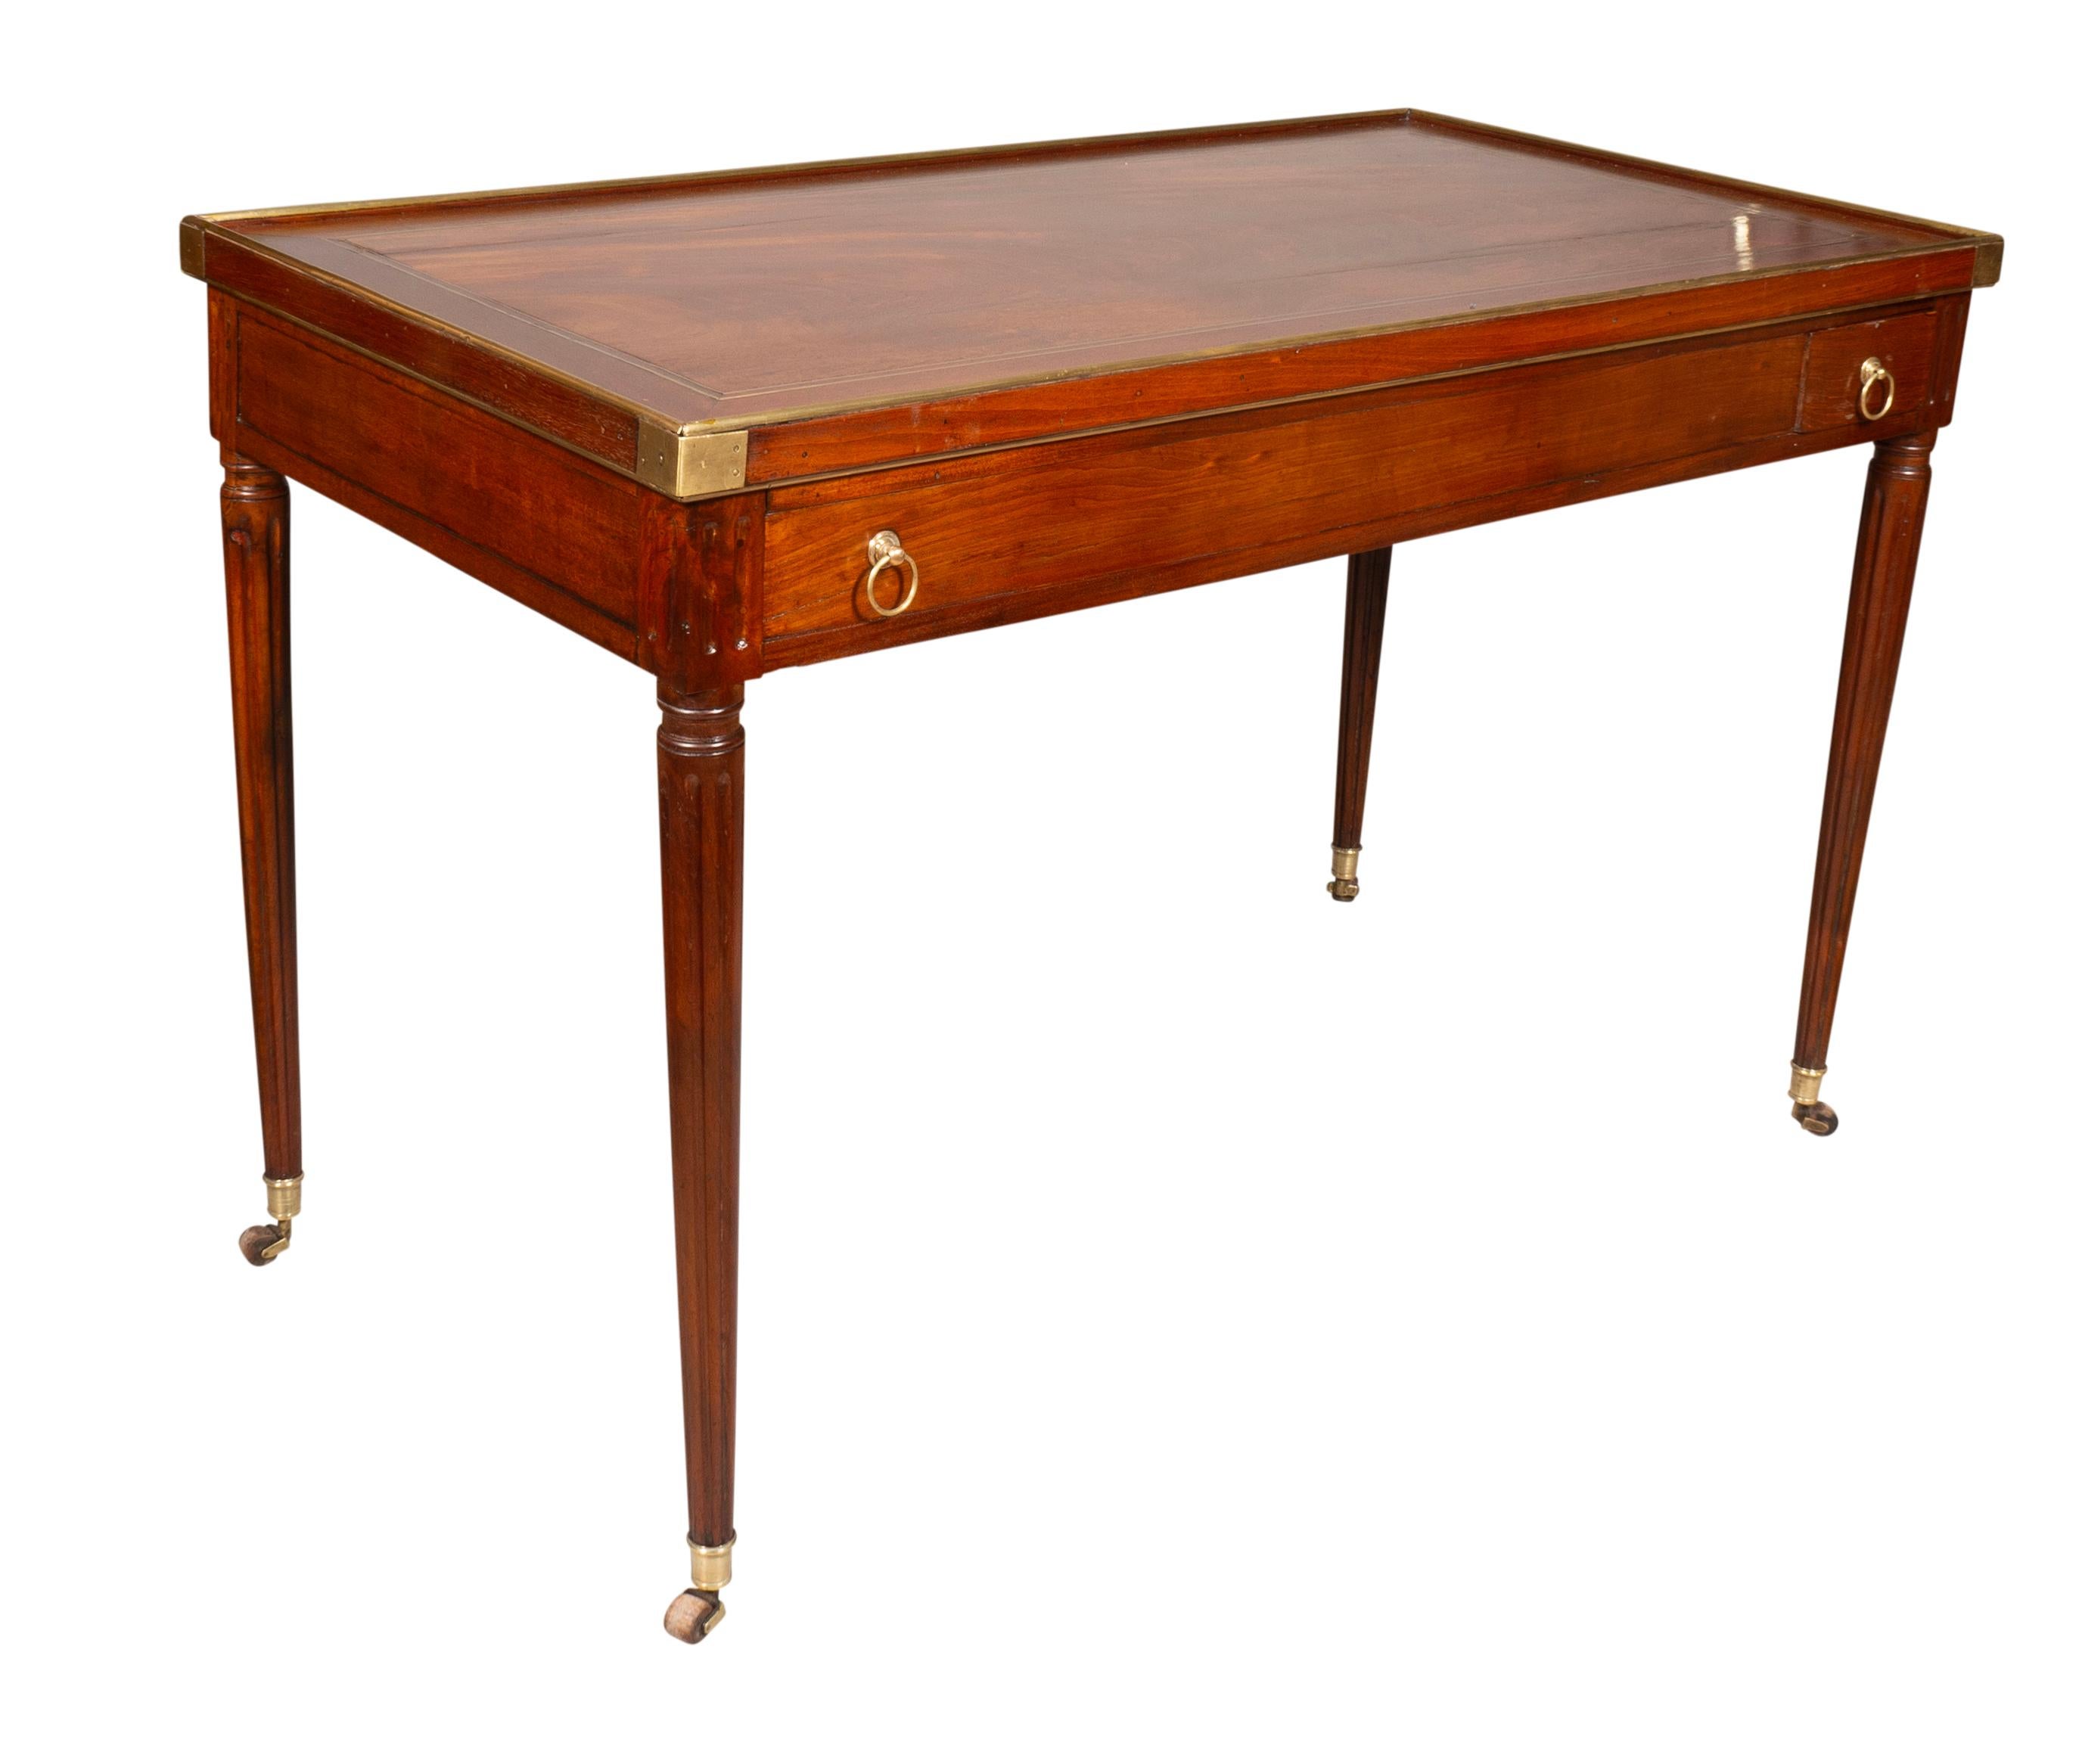 19th Century Directoire Mahogany And Brass Mounted Tric Trac Table For Sale